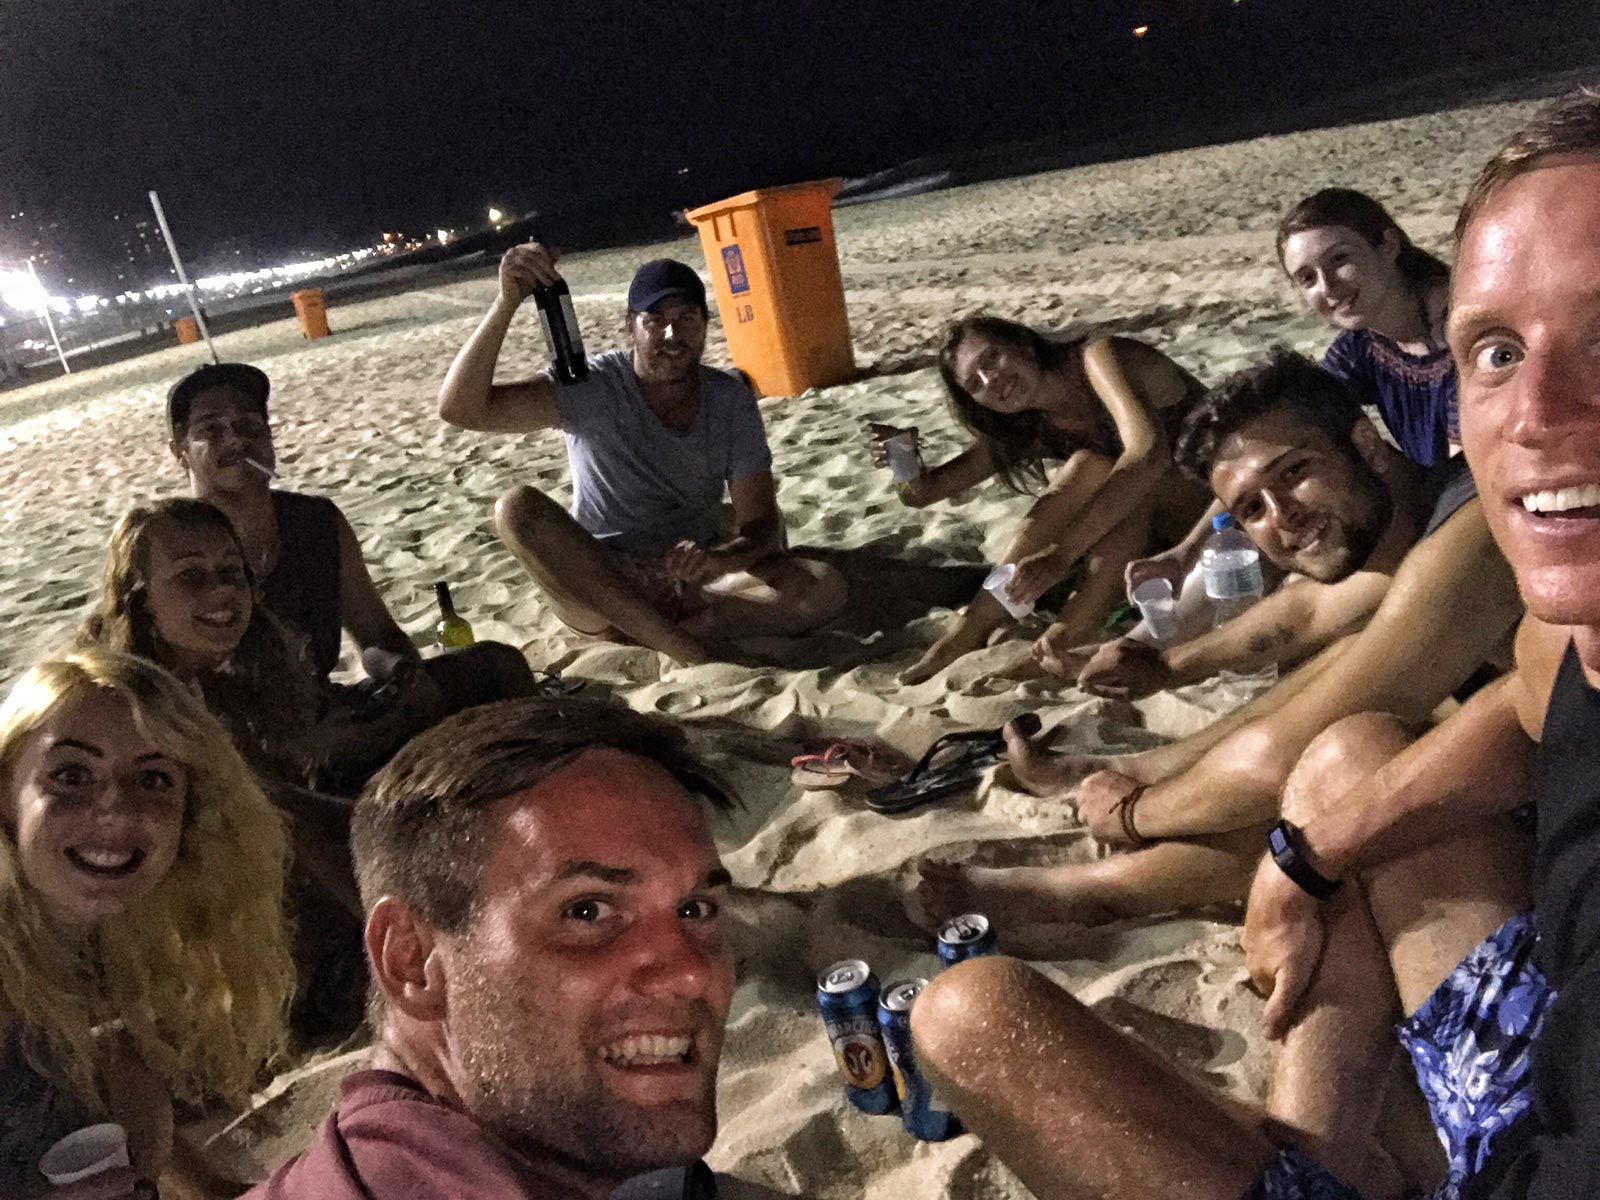 David Simpson and friends spending Christmas Eve on the beach in Rio de Janeiro, Brazil. Favelas, Christ & Sugarloaf, my intro to Rio